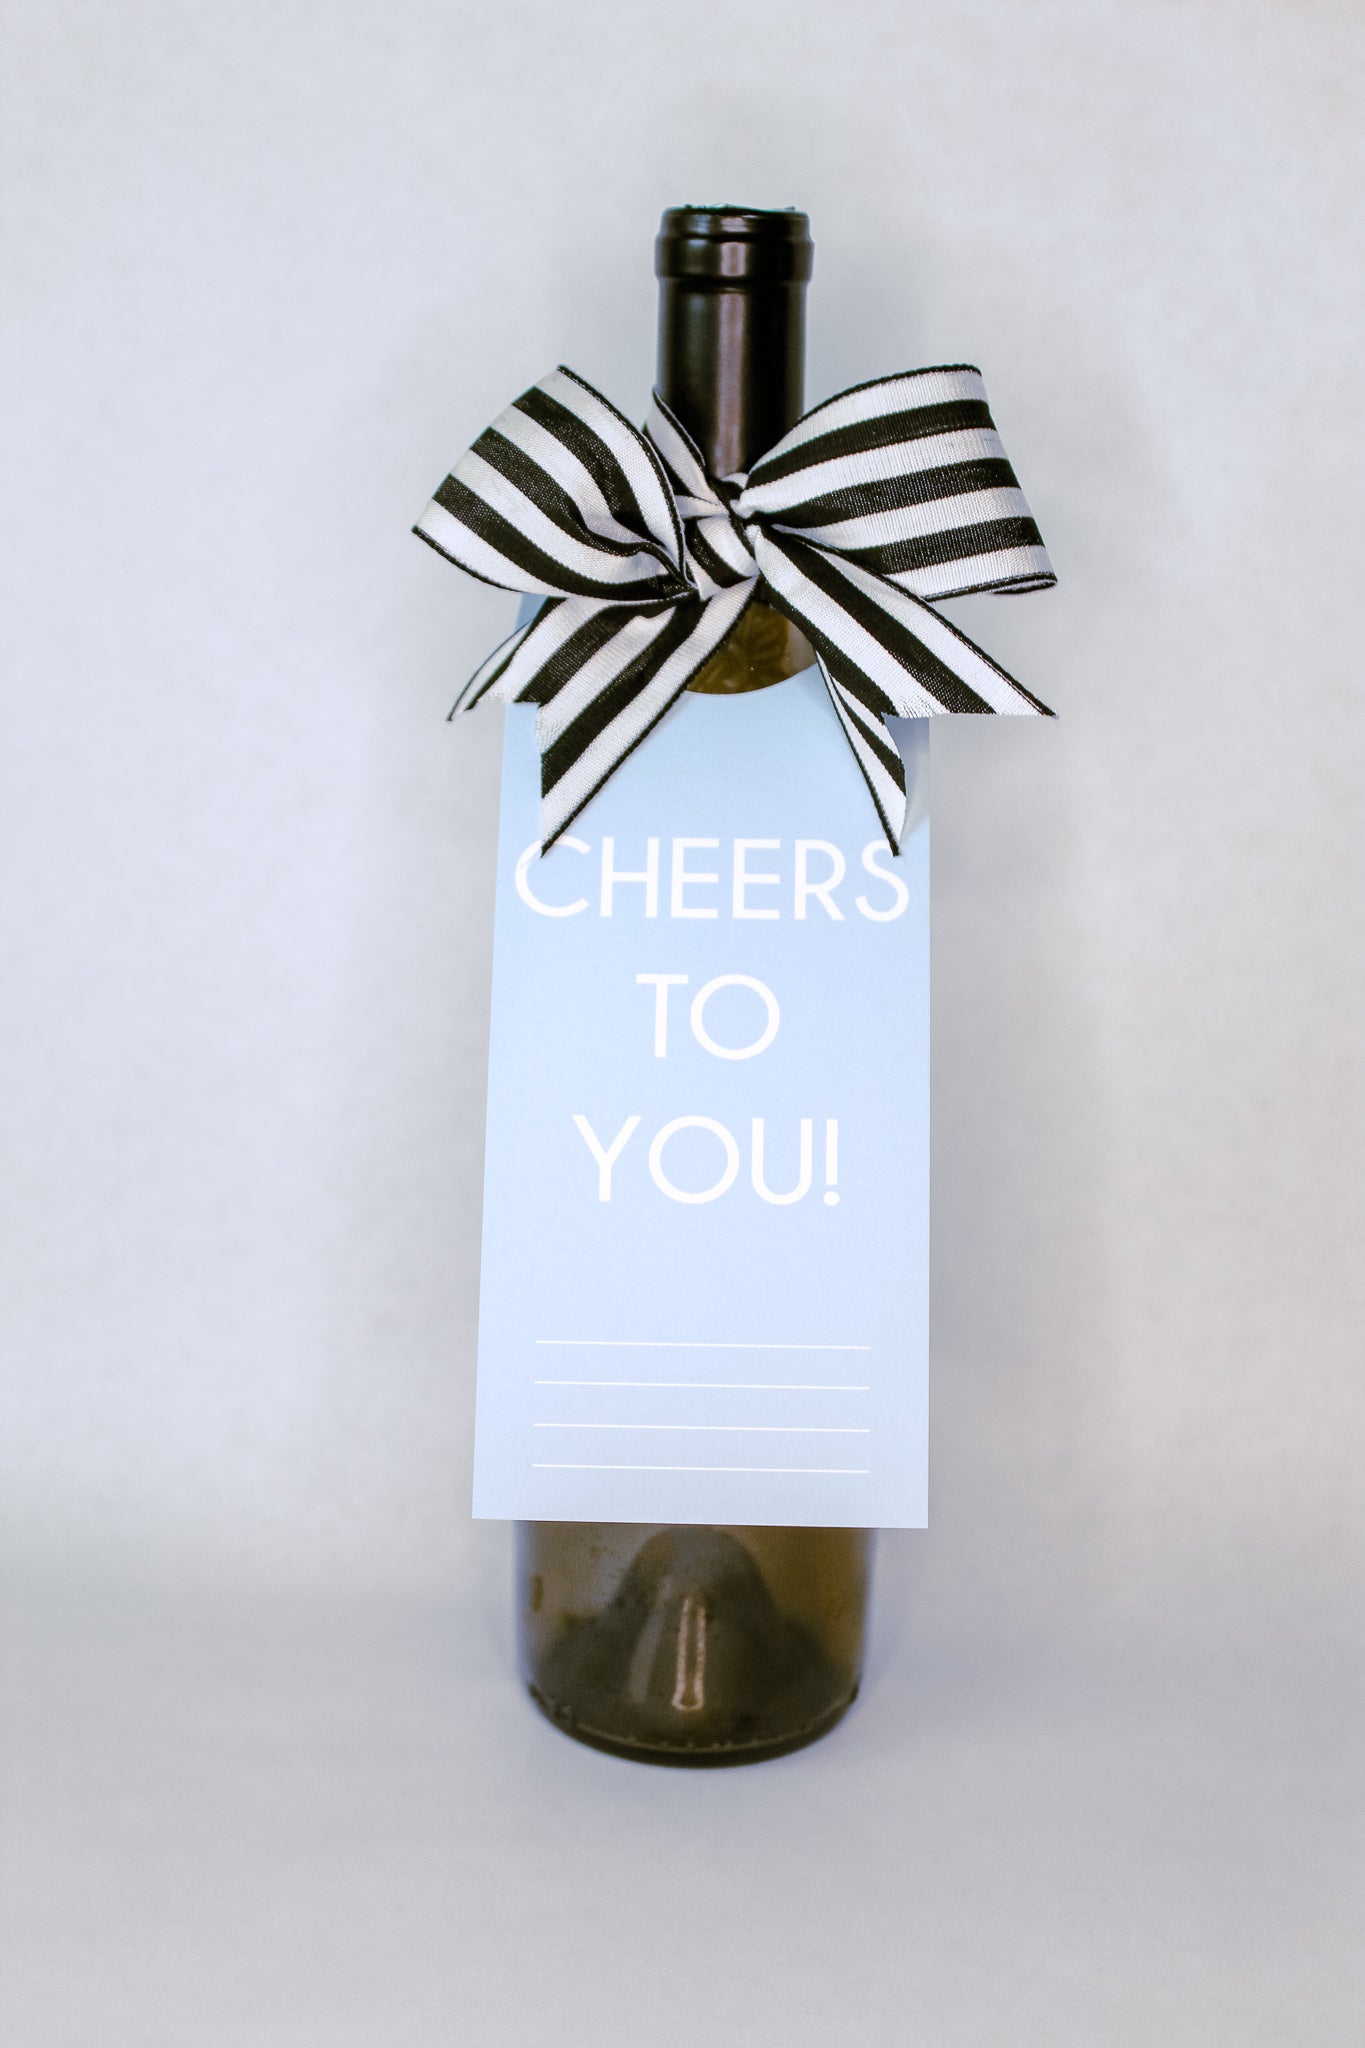 Cheers to You! Bottle Neck Gift Tag